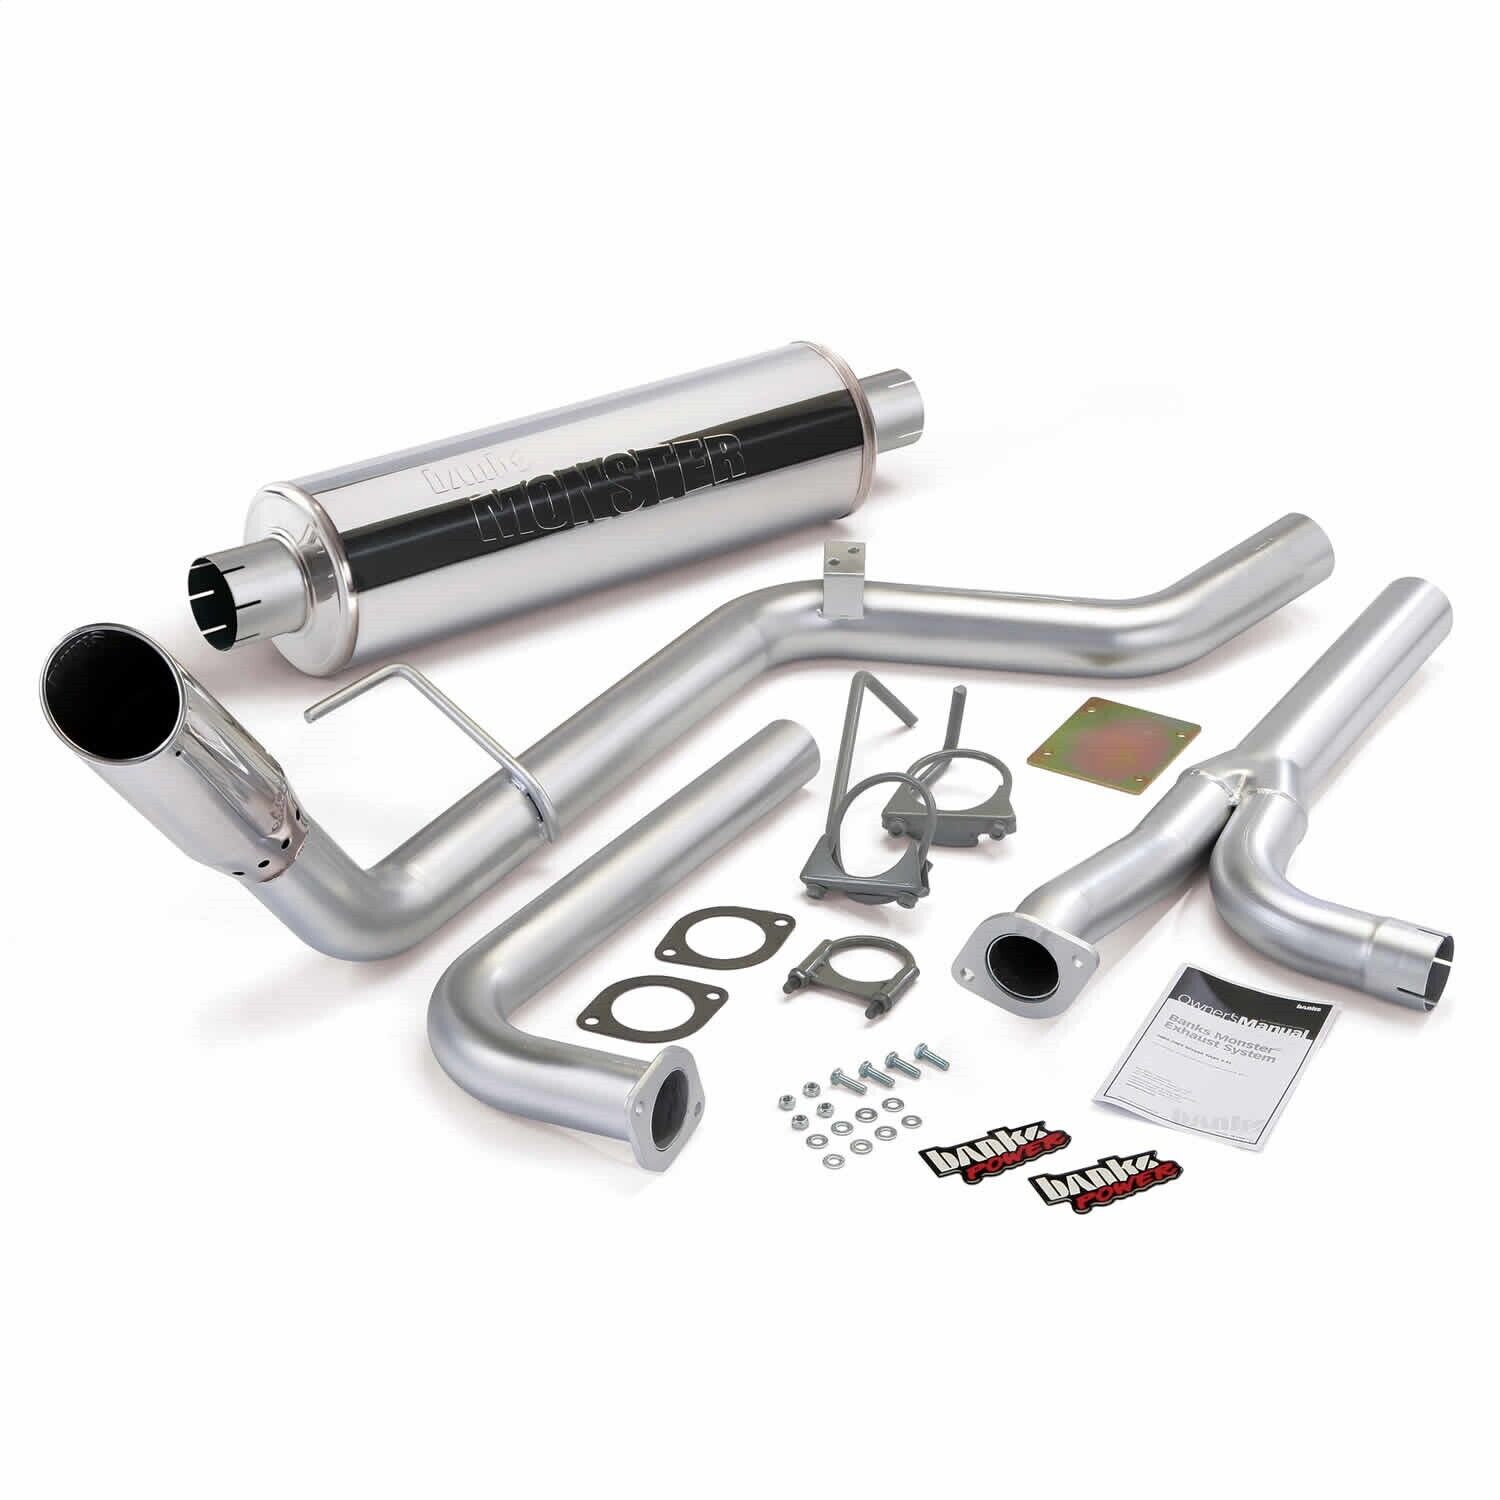 Banks Power 48125 Monster Exhaust System Fits 05-19 Frontier